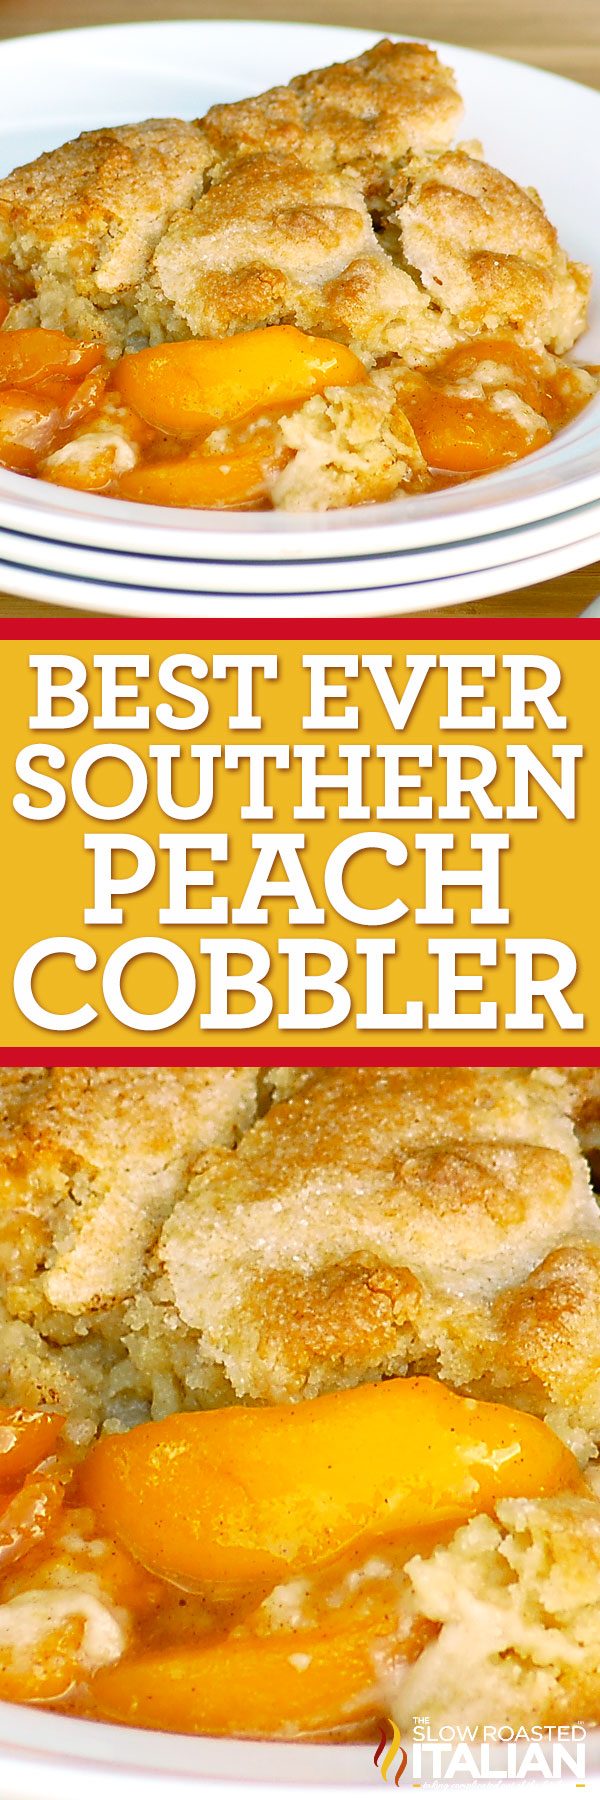 titled image (and shown): Best Peach Cobbler